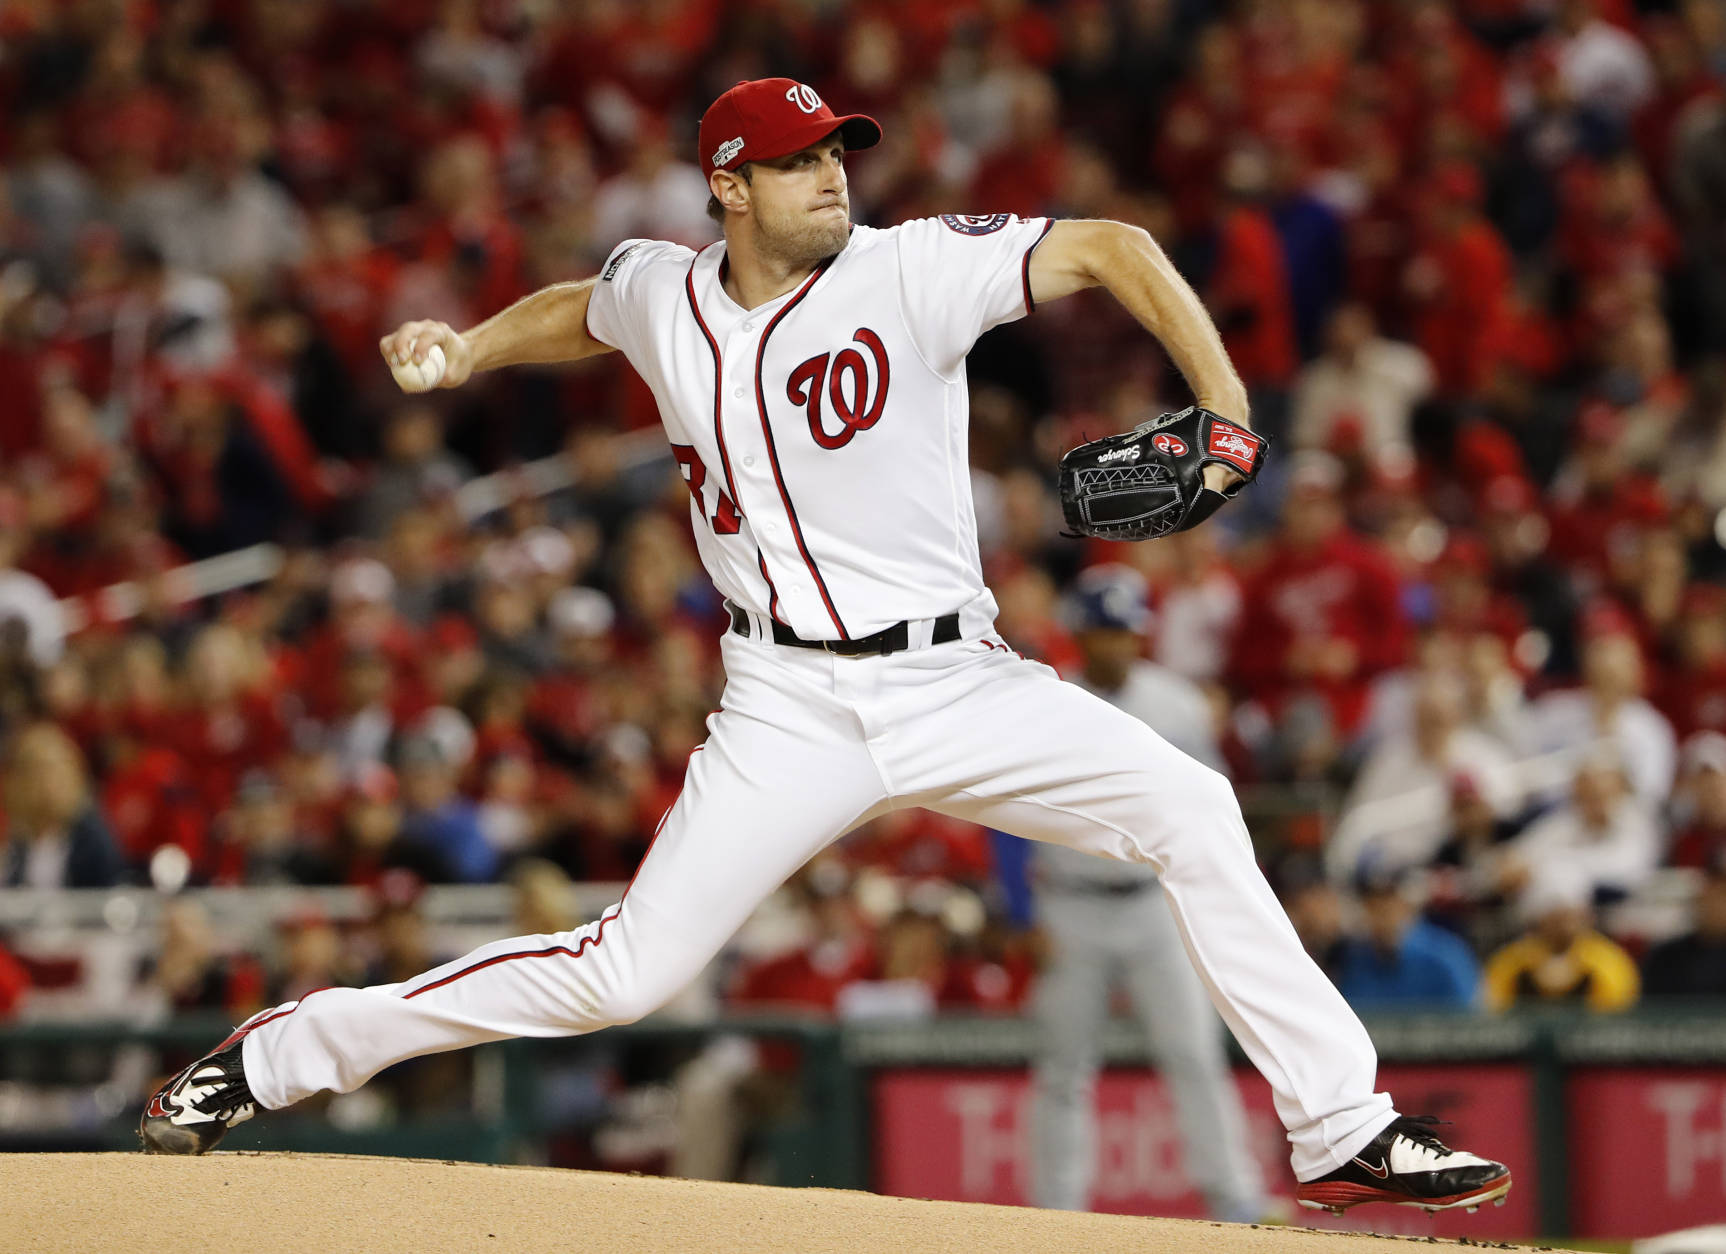 Washington Nationals starting pitcher Max Scherzer throws during the first inning of Game 5 of baseball's National League Division Series, against the Los Angeles Dodgers at Nationals Park, Thursday, Oct. 13, 2016, in Washington. (AP Photo/Pablo Martinez Monsivais)